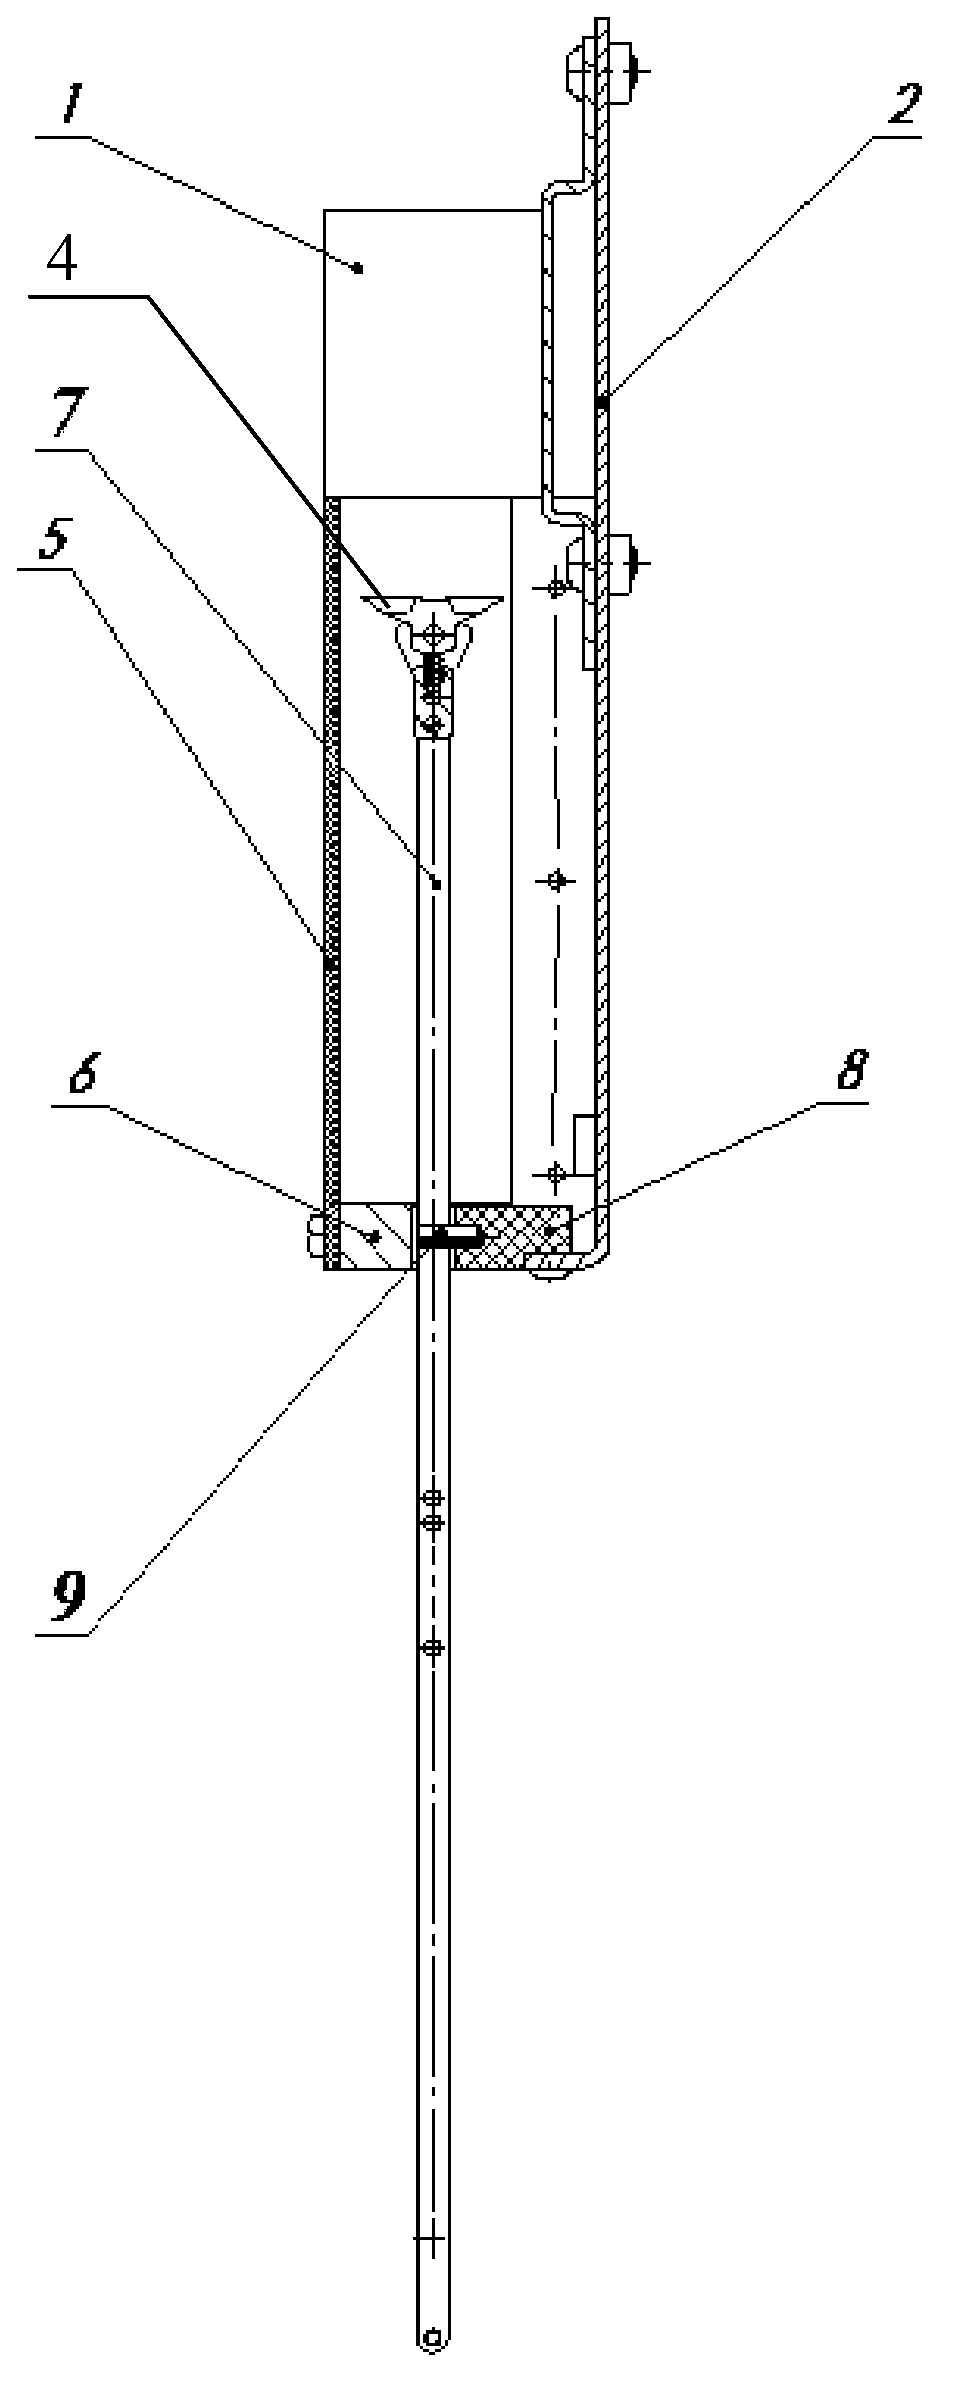 Harness component for electromagnetic heddle selection